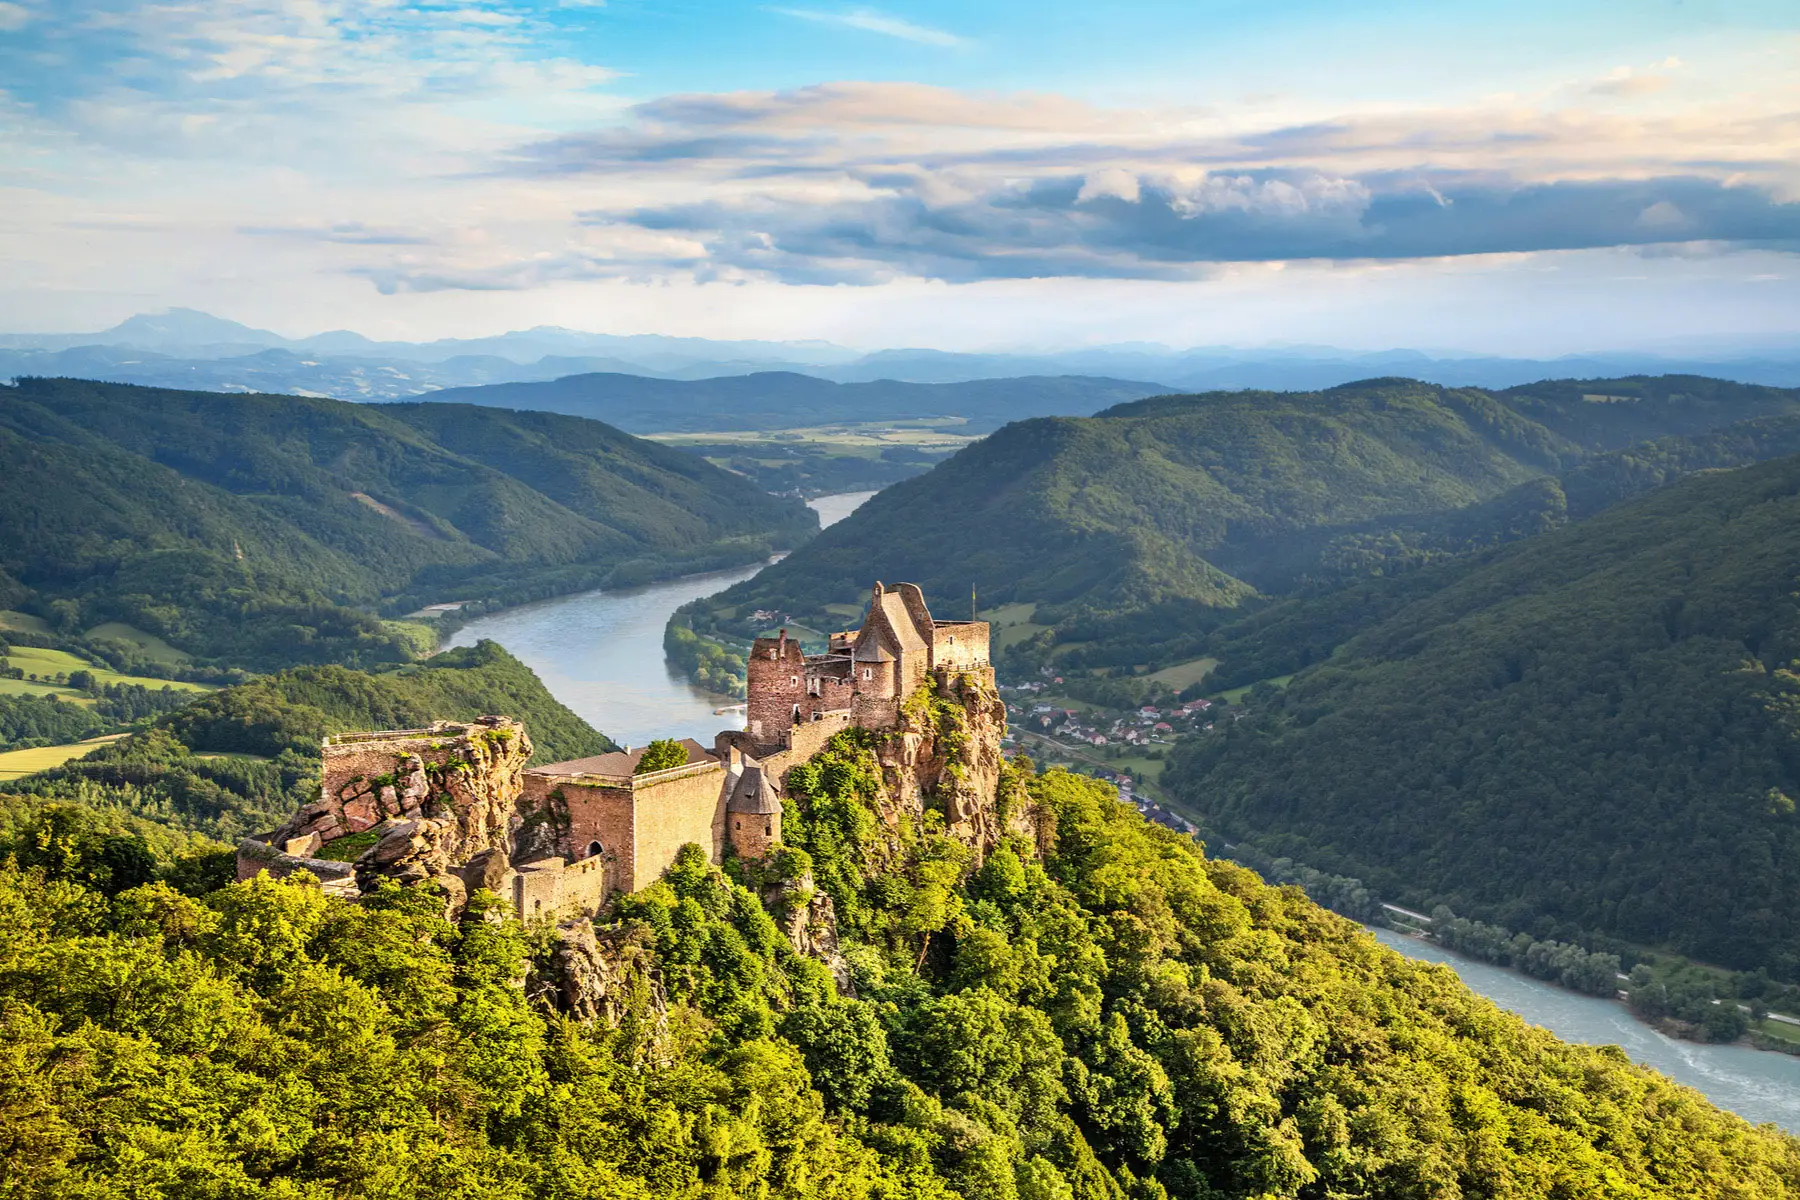 The ruins of Aggstein Castle along the Danube River